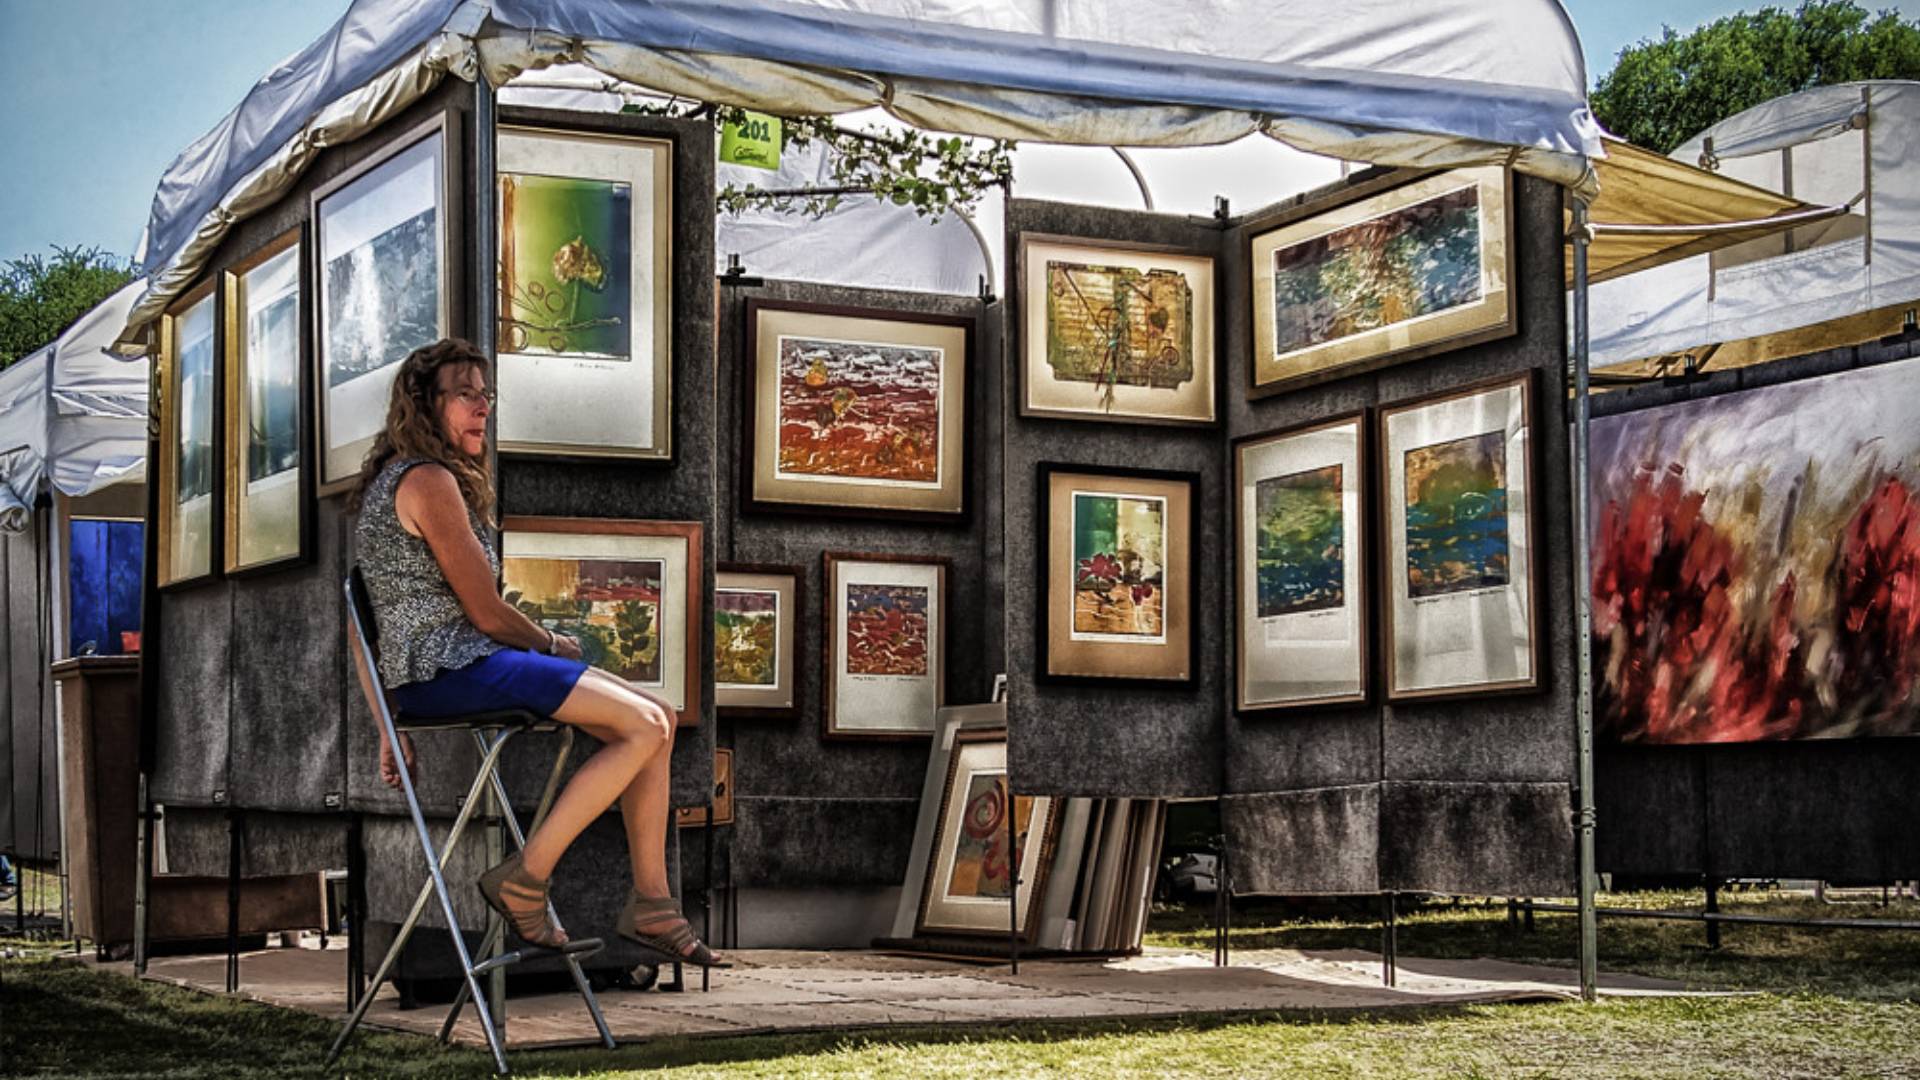 A lively image capturing the vibrant atmosphere of the annual Cottonwood Art Festival, with colorful booths, live music, and creative art displays, symbolizing Richardson's rich cultural scene and artistic heritage.